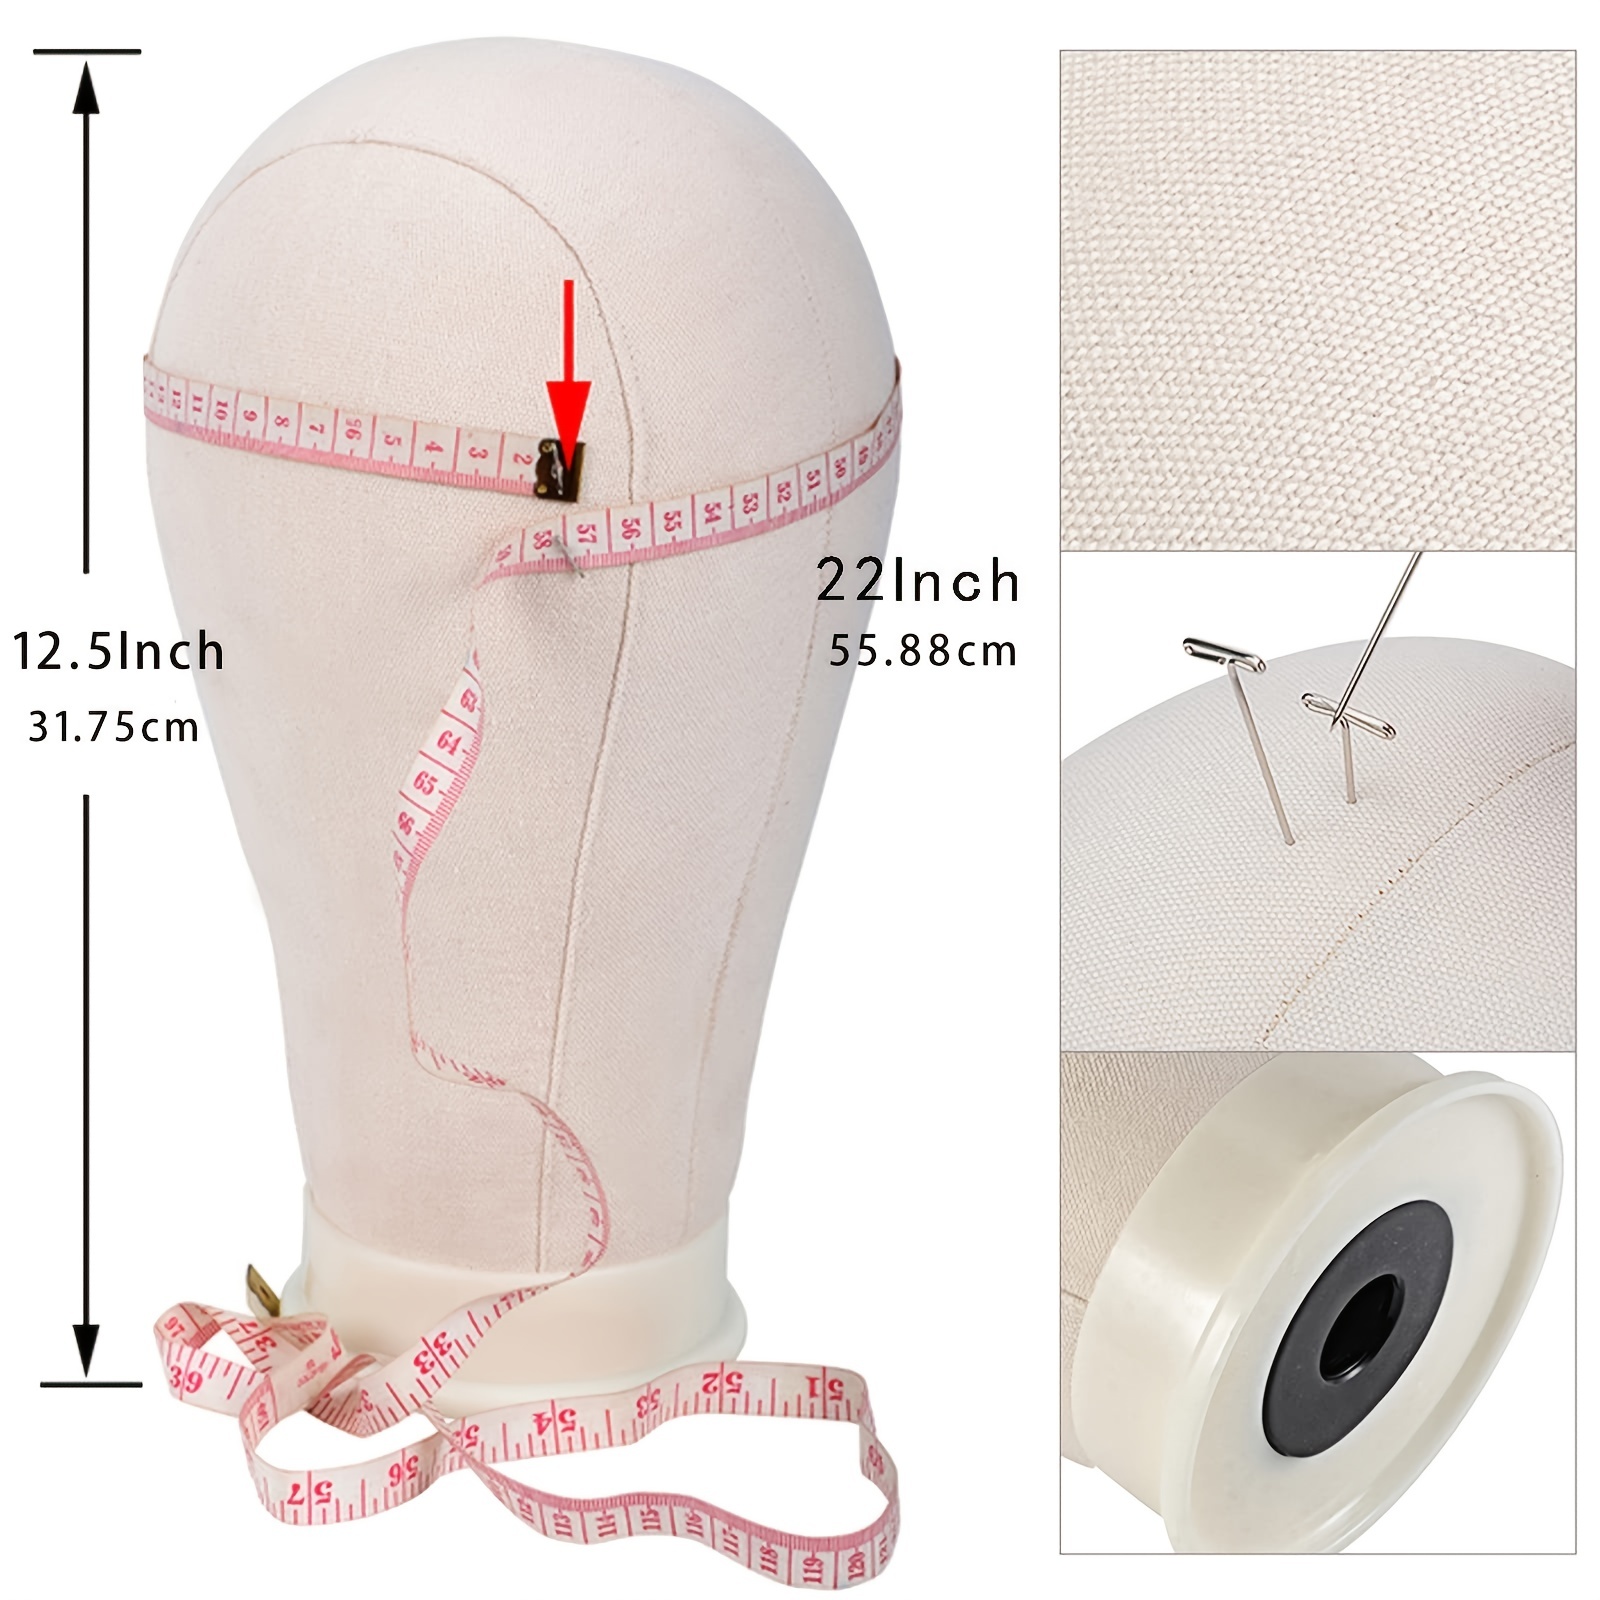 MILLYSHINE 22Inch Wig Head,Wig Stand Tripod With Mannequin Head